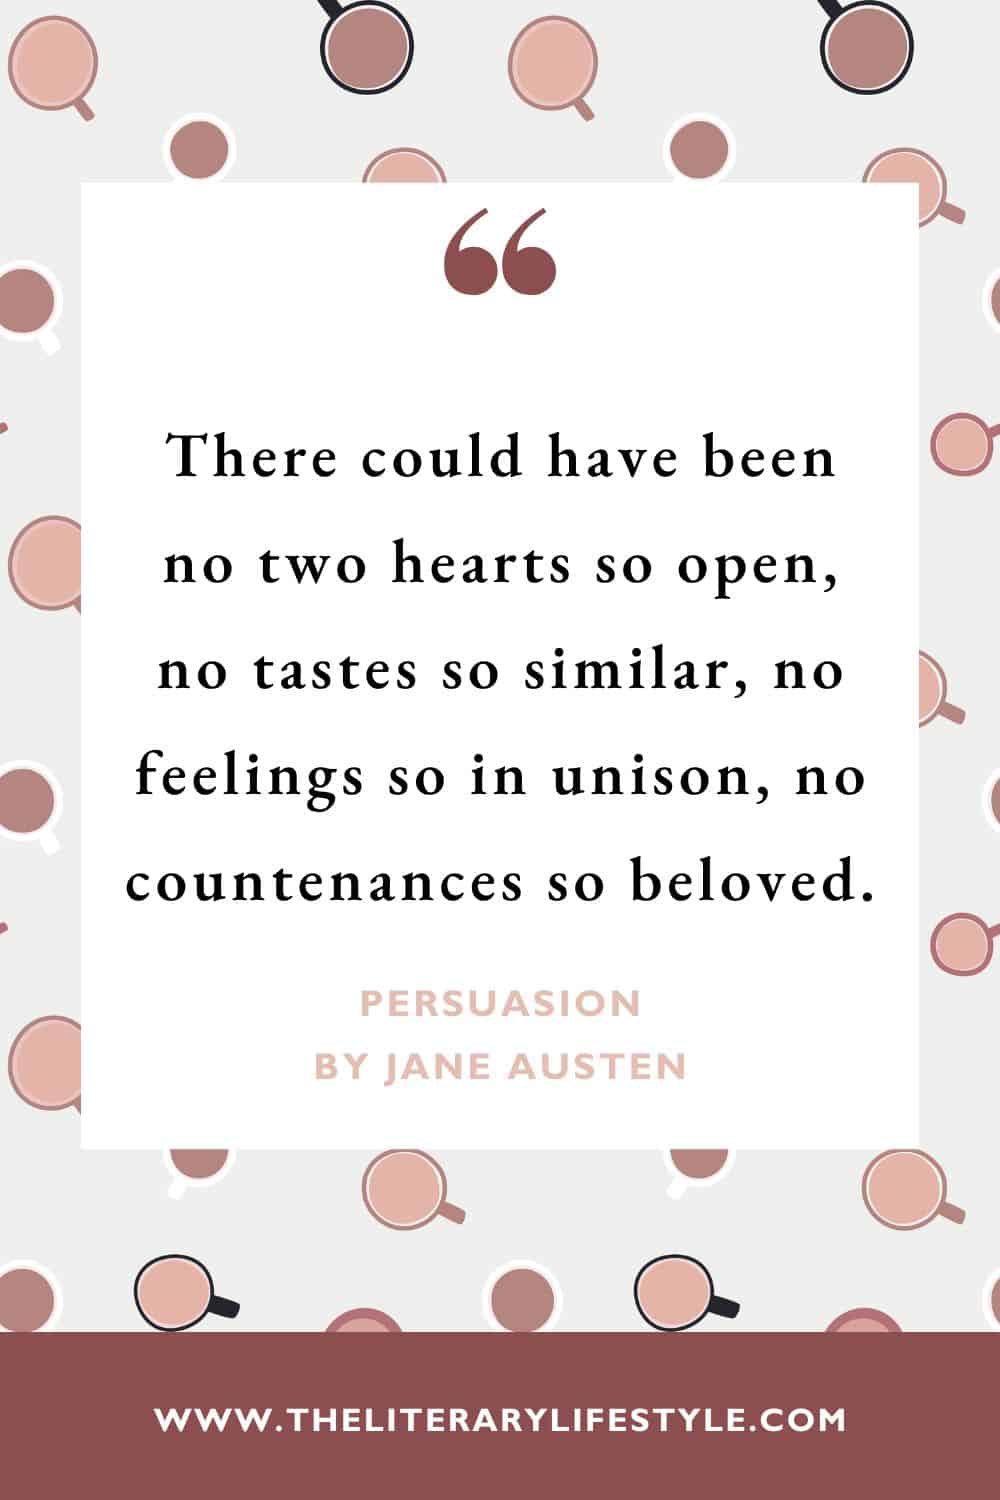 "There could have been no two hearts so open, no tastes so similar, no feelings so in unison, no countenances so beloved."